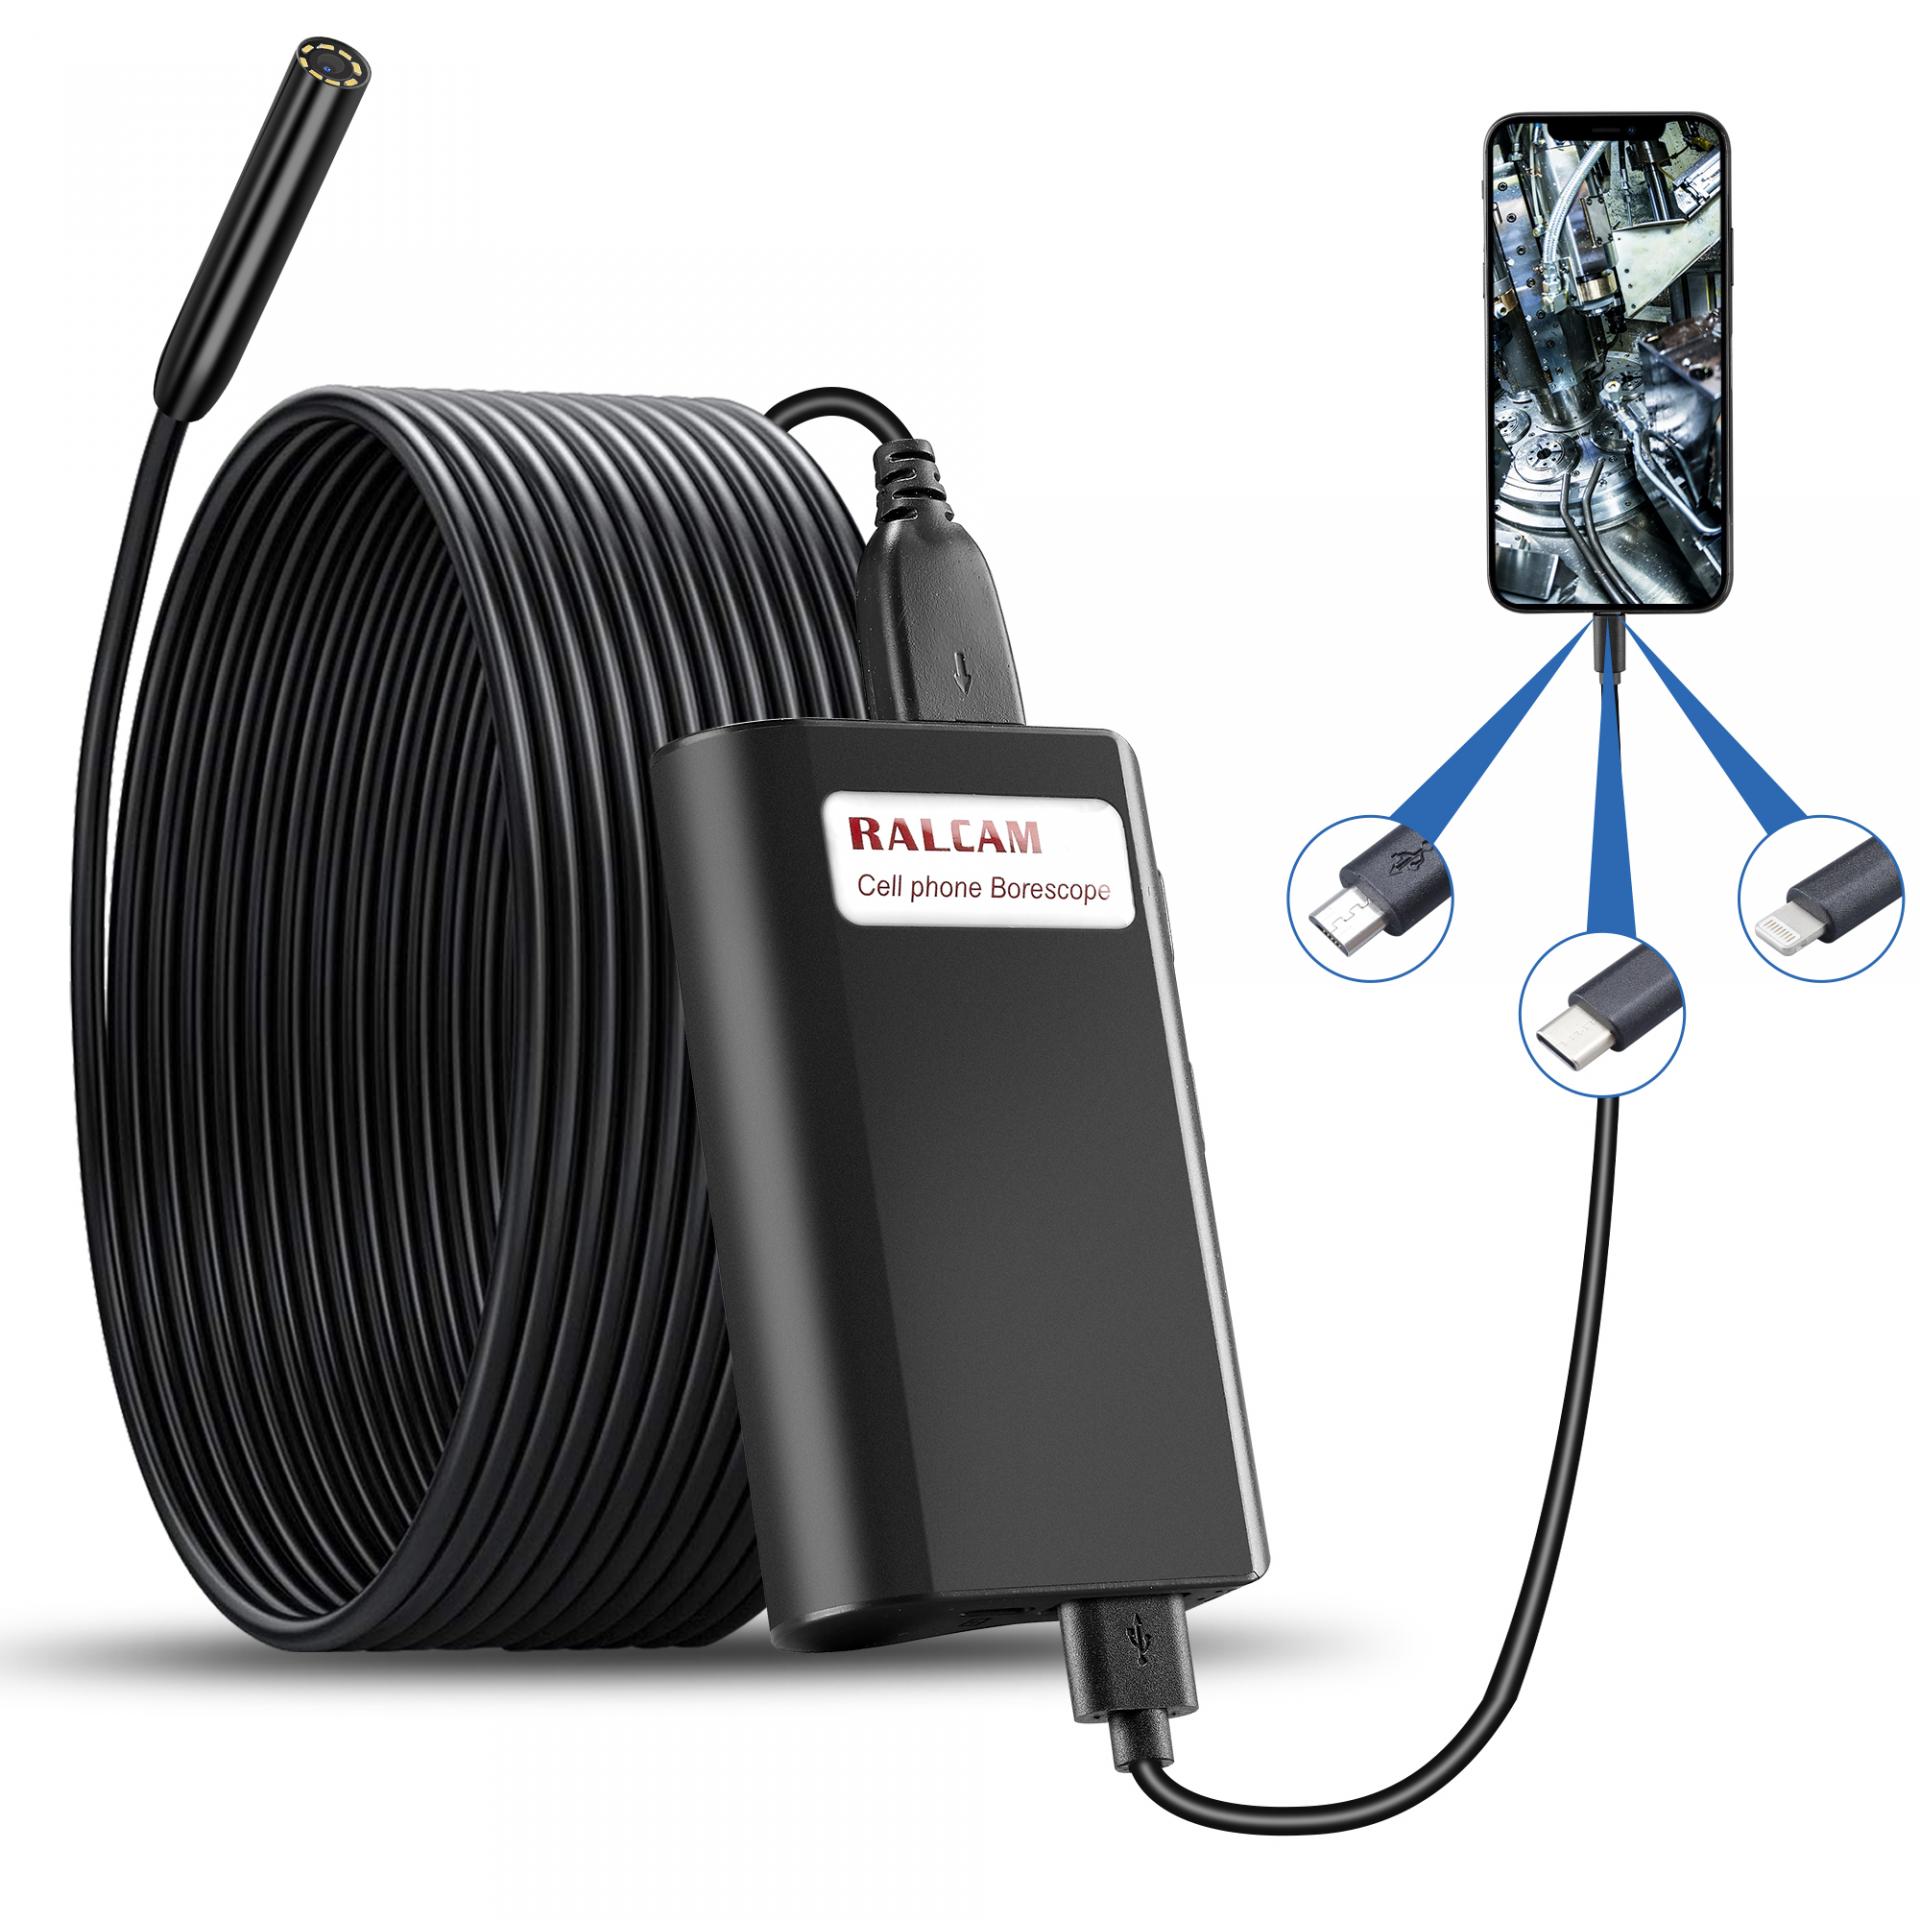 Best Quality 3.5m Tube Borescope for Android High Temperature Protection Borescope Iphone 8.5mm USB Borescope Factory